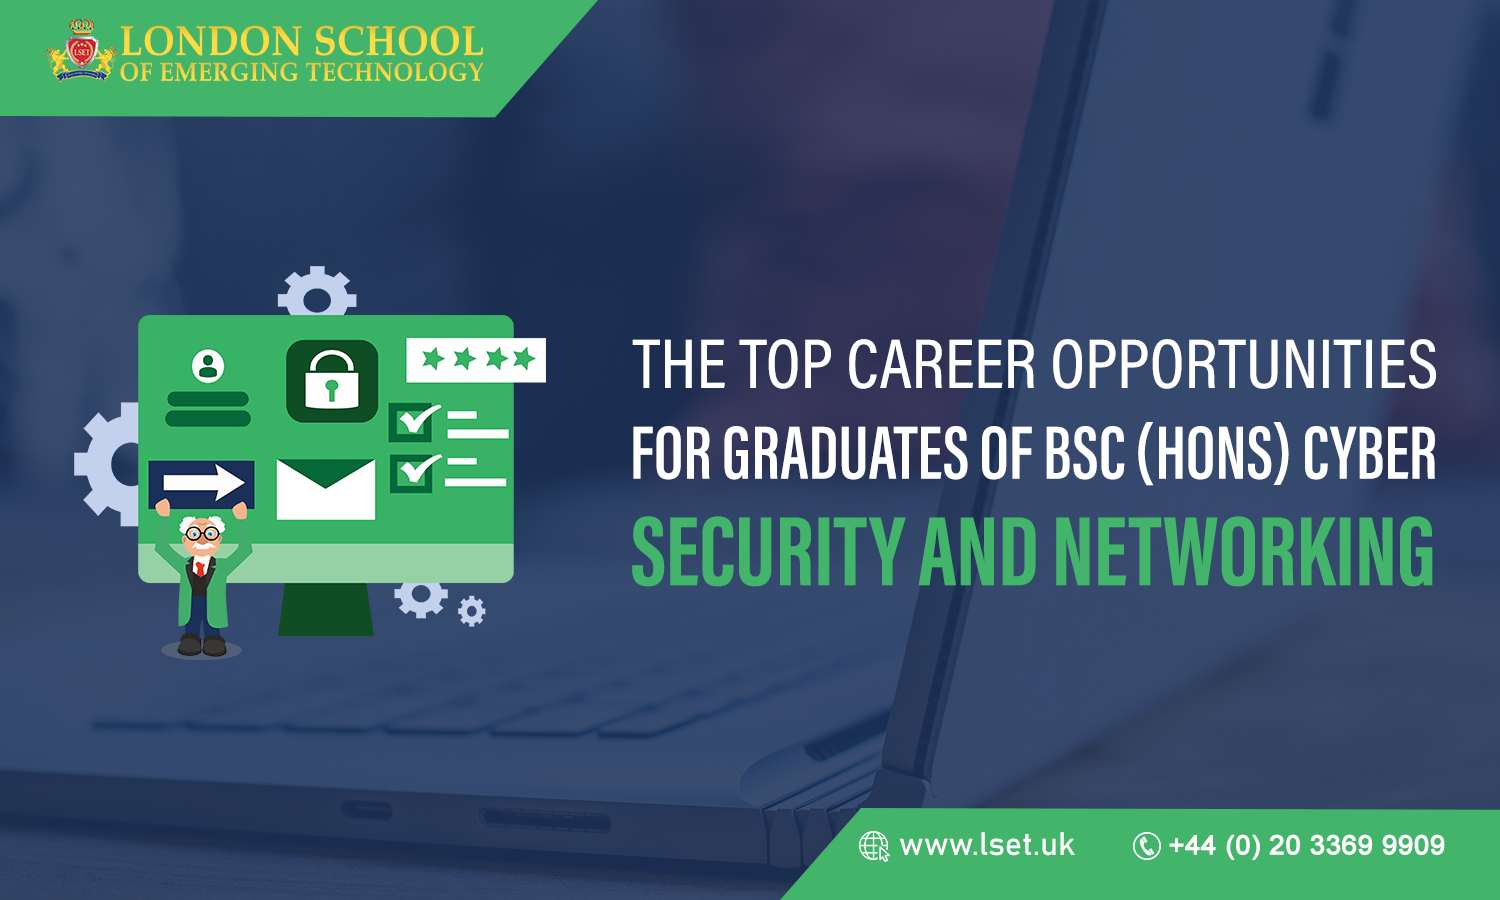 The Top Career Opportunities for Graduates of BSc (Hons) Cyber Security and Networking